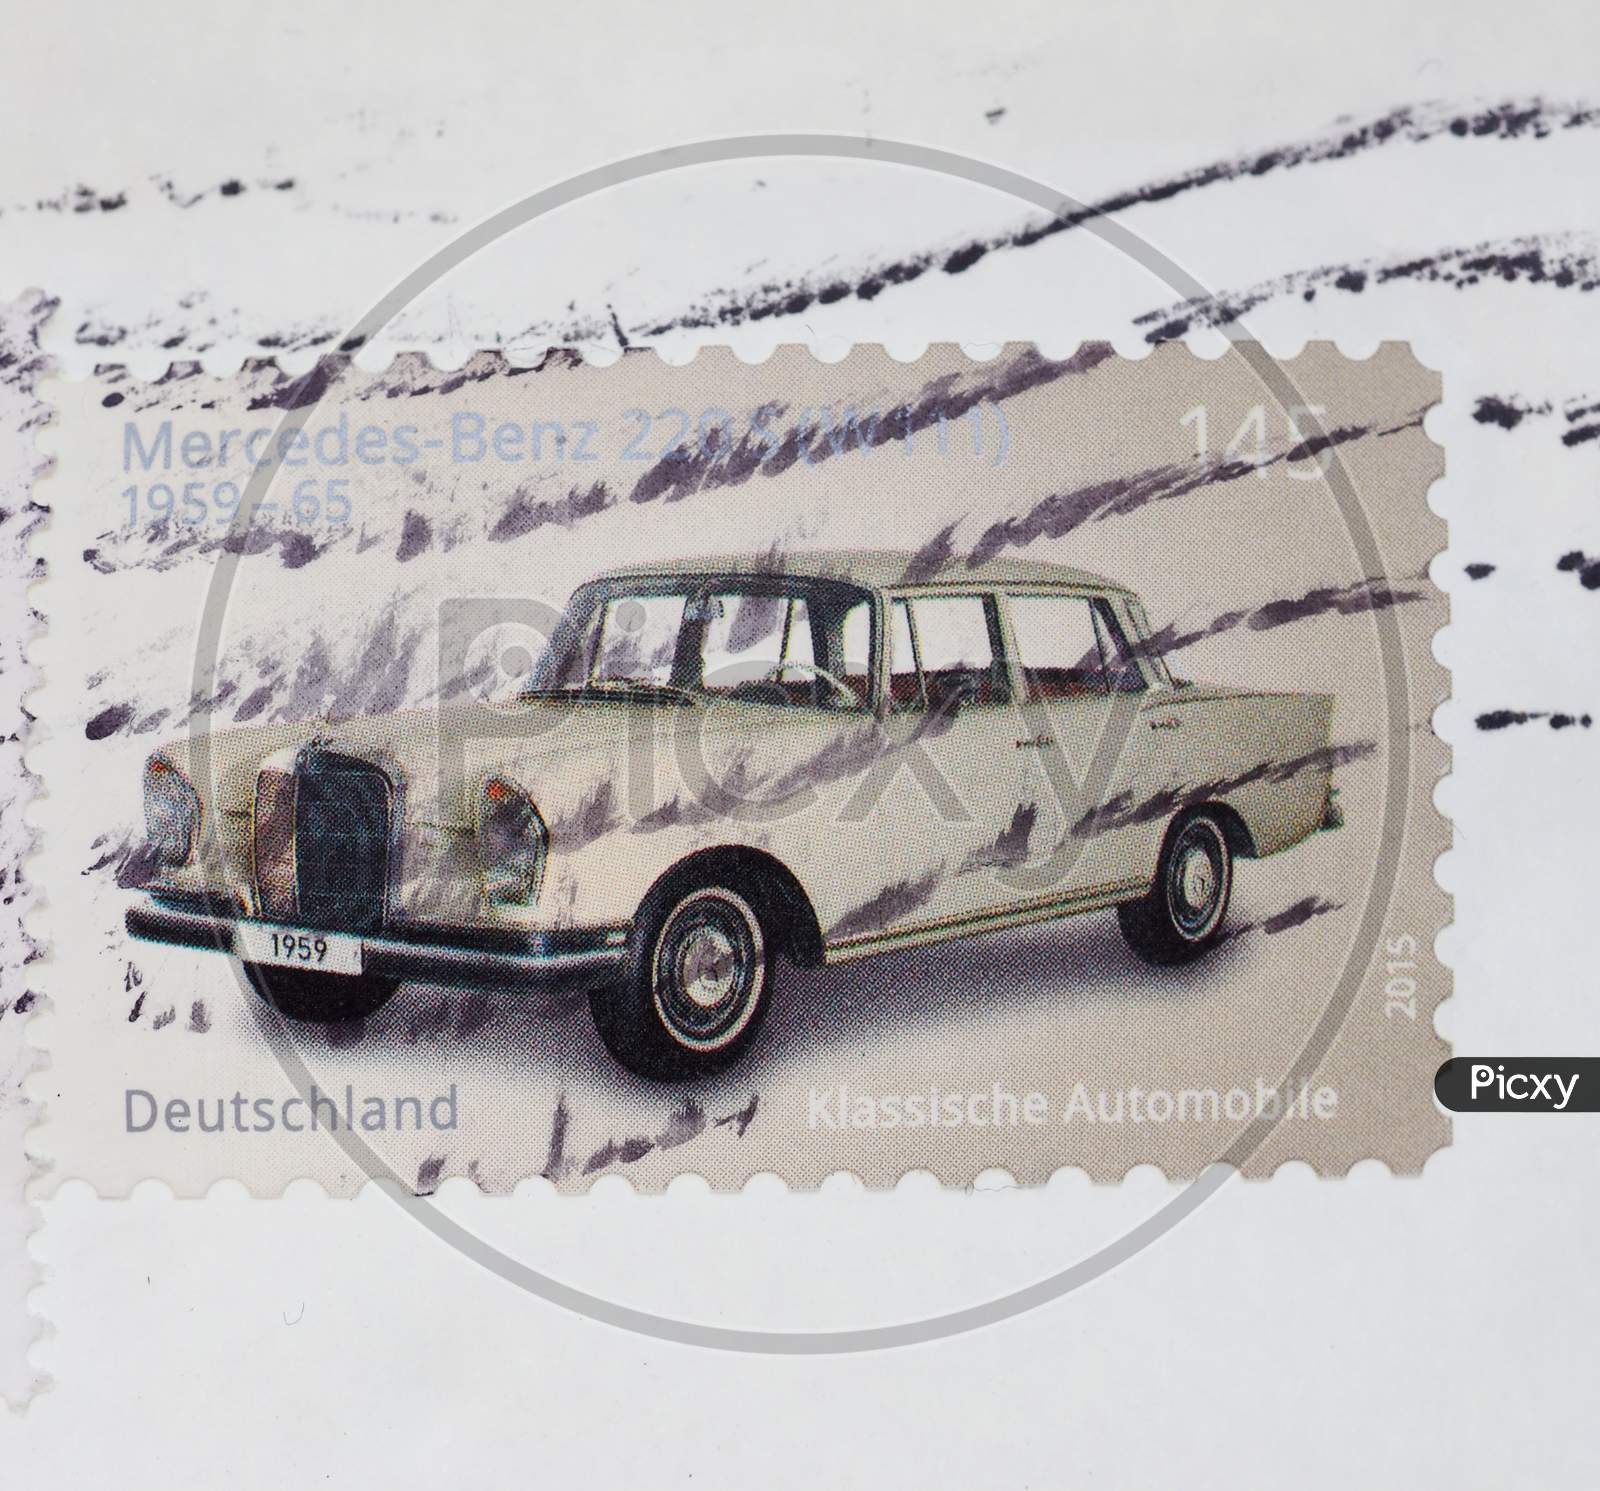 Berlin, Germany - July 31, 2015: Stamps Printed By Germany Show A Classic Mercedez Benz Car